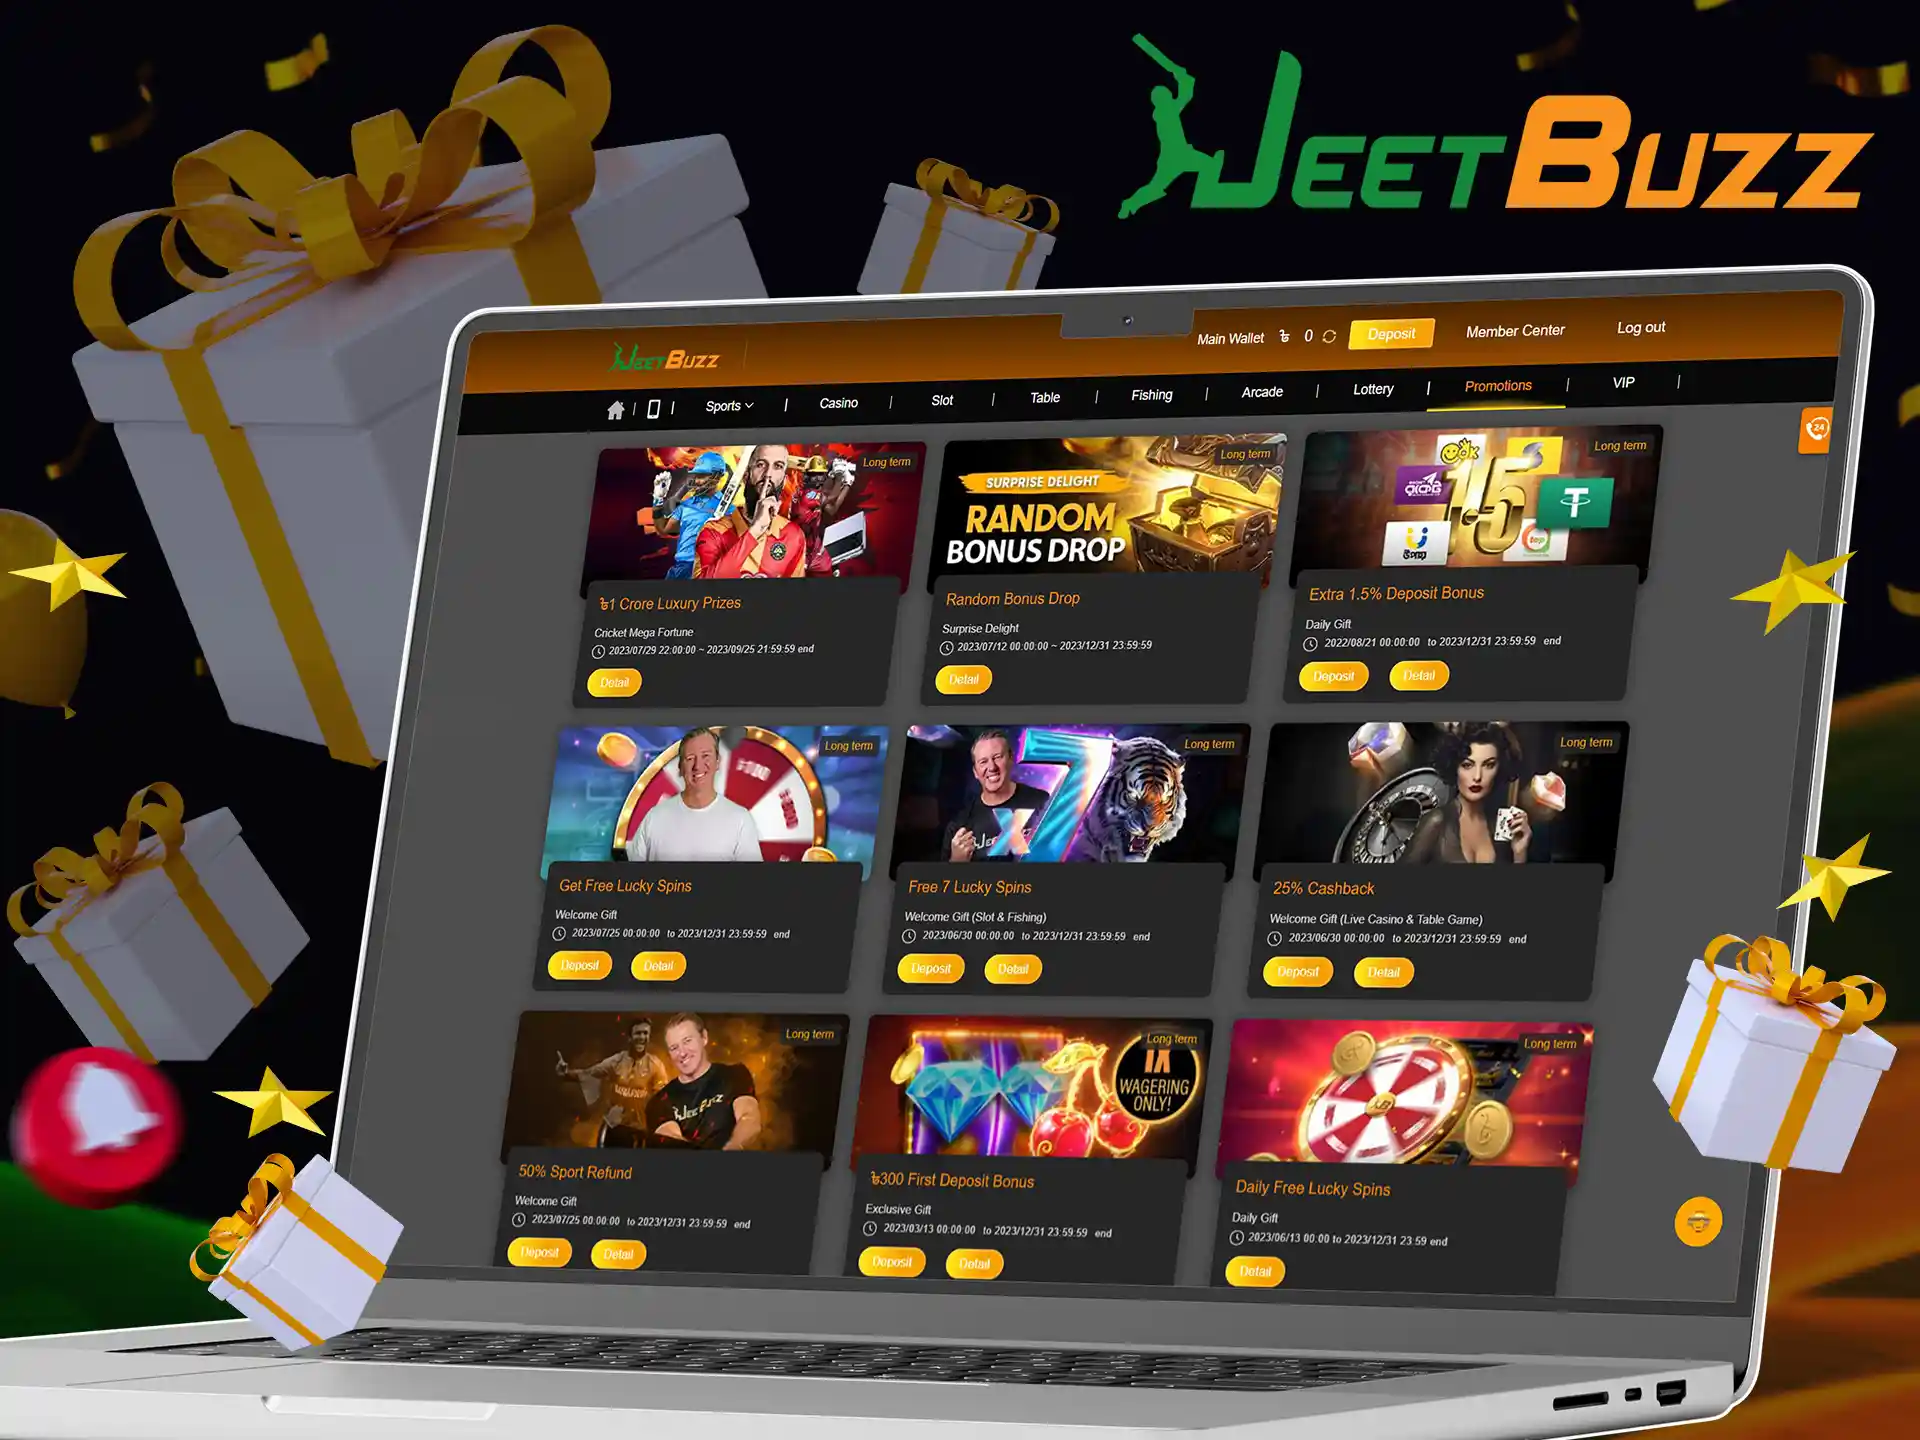 Welcome bonuses for new JeetBuzz players.